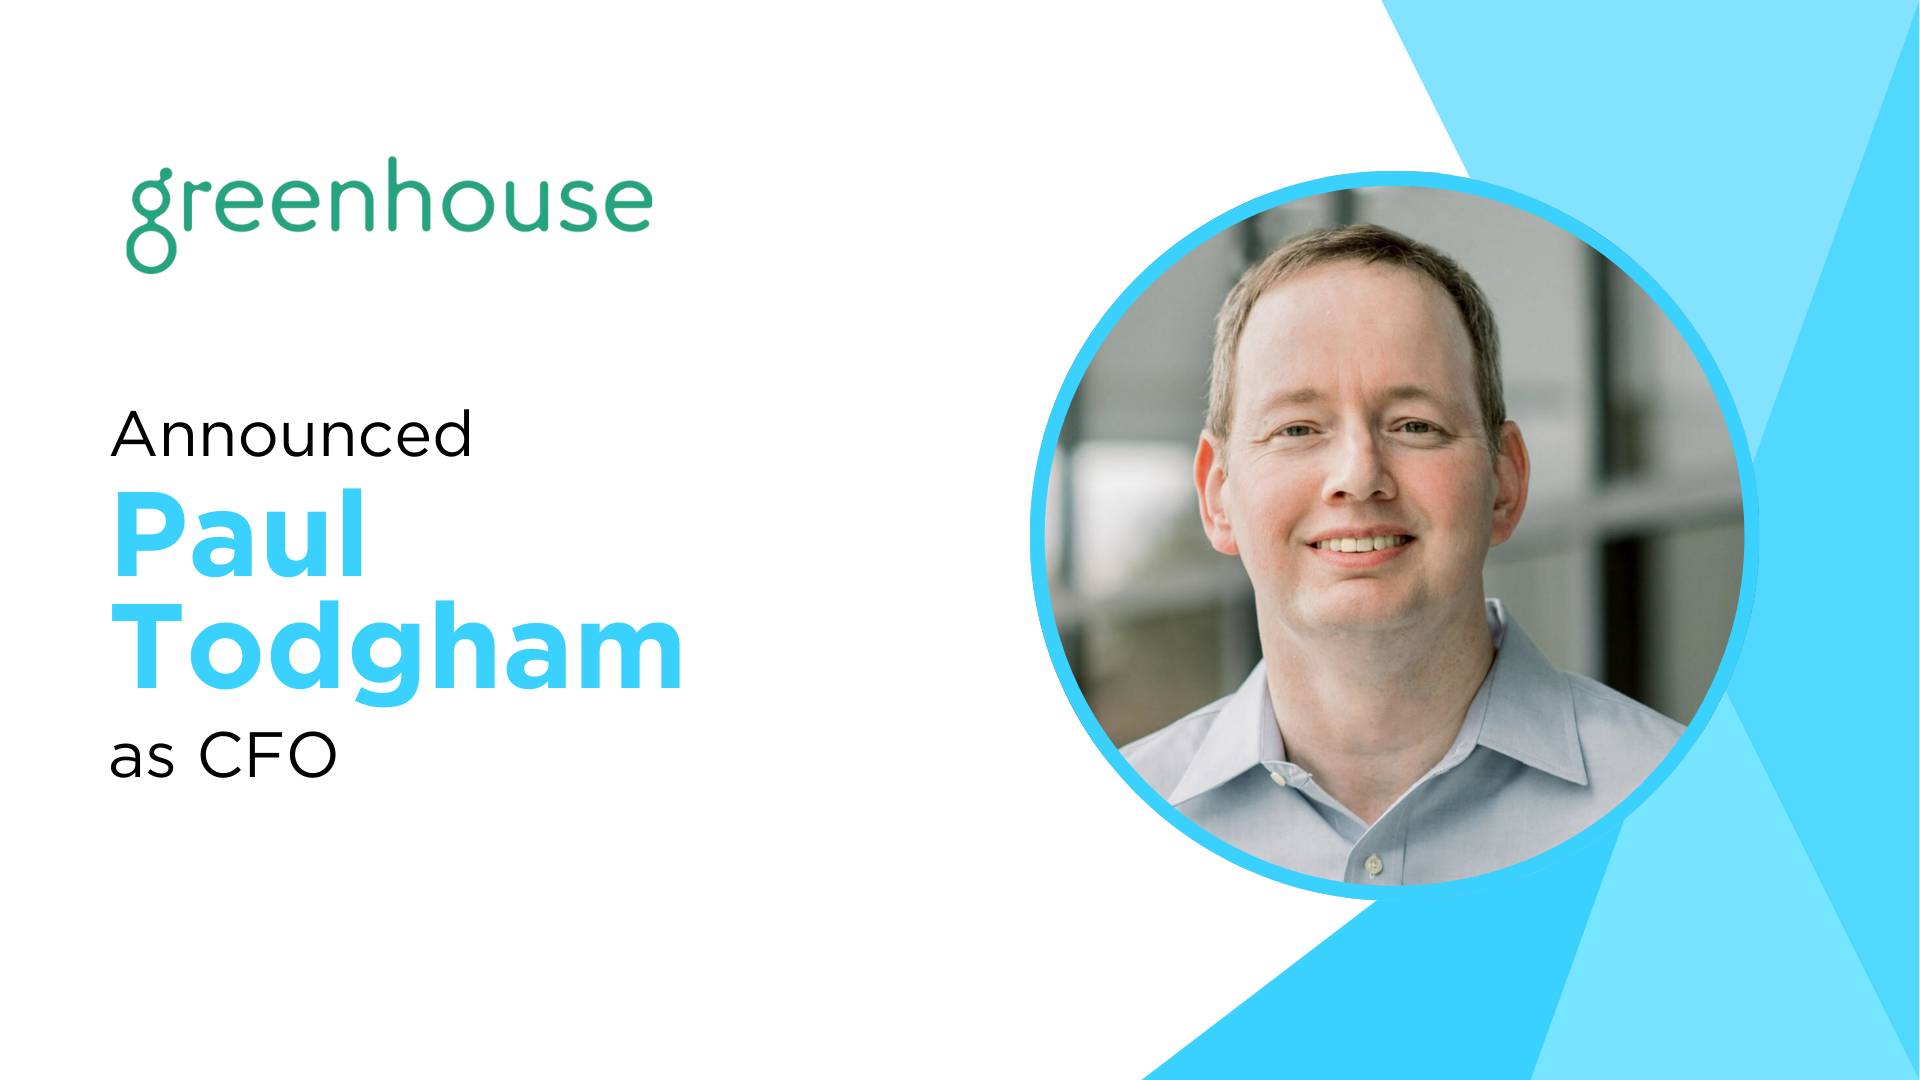 "Greenhouse Welcomes Paul Todgham as New Chief Financial Officer"